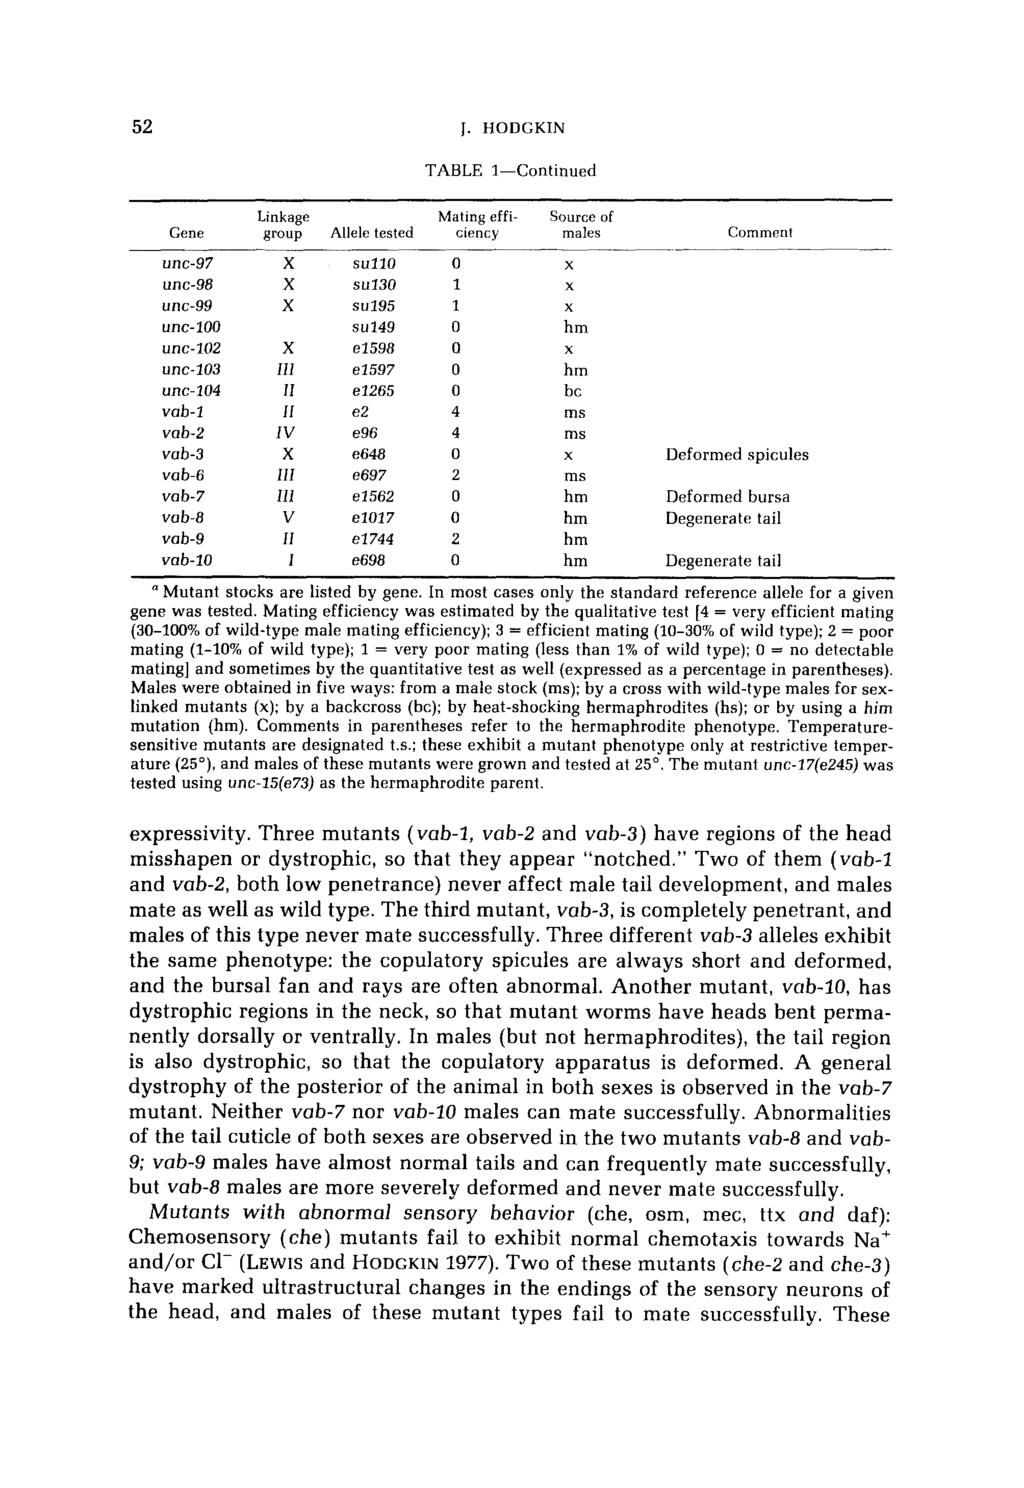 5 J. HODGKN TABLE -Continued Linkage Mating effi- Source of Gene group Allele tested ciency males Comment unc-97 unc-98 unc-99 unc- unc- unc- unc-4 vab- vab- vab- vab-6 vab-7 vab-8 vab-9 vab- SUll